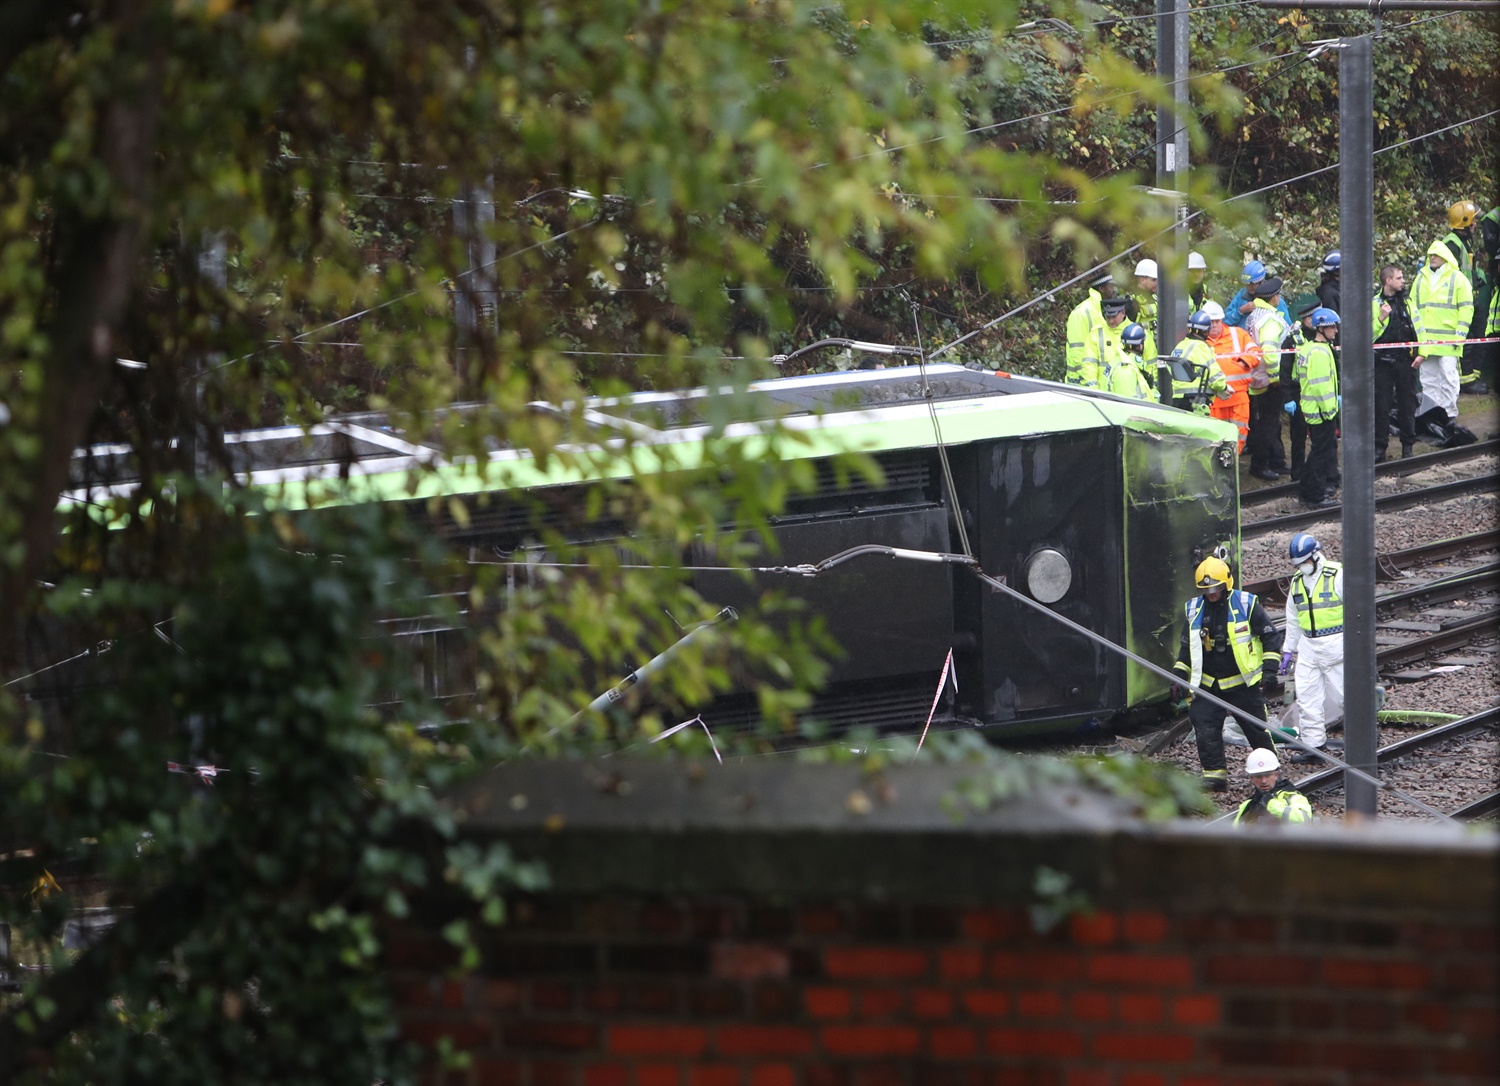 Passengers trapped after tram derails at Croydon